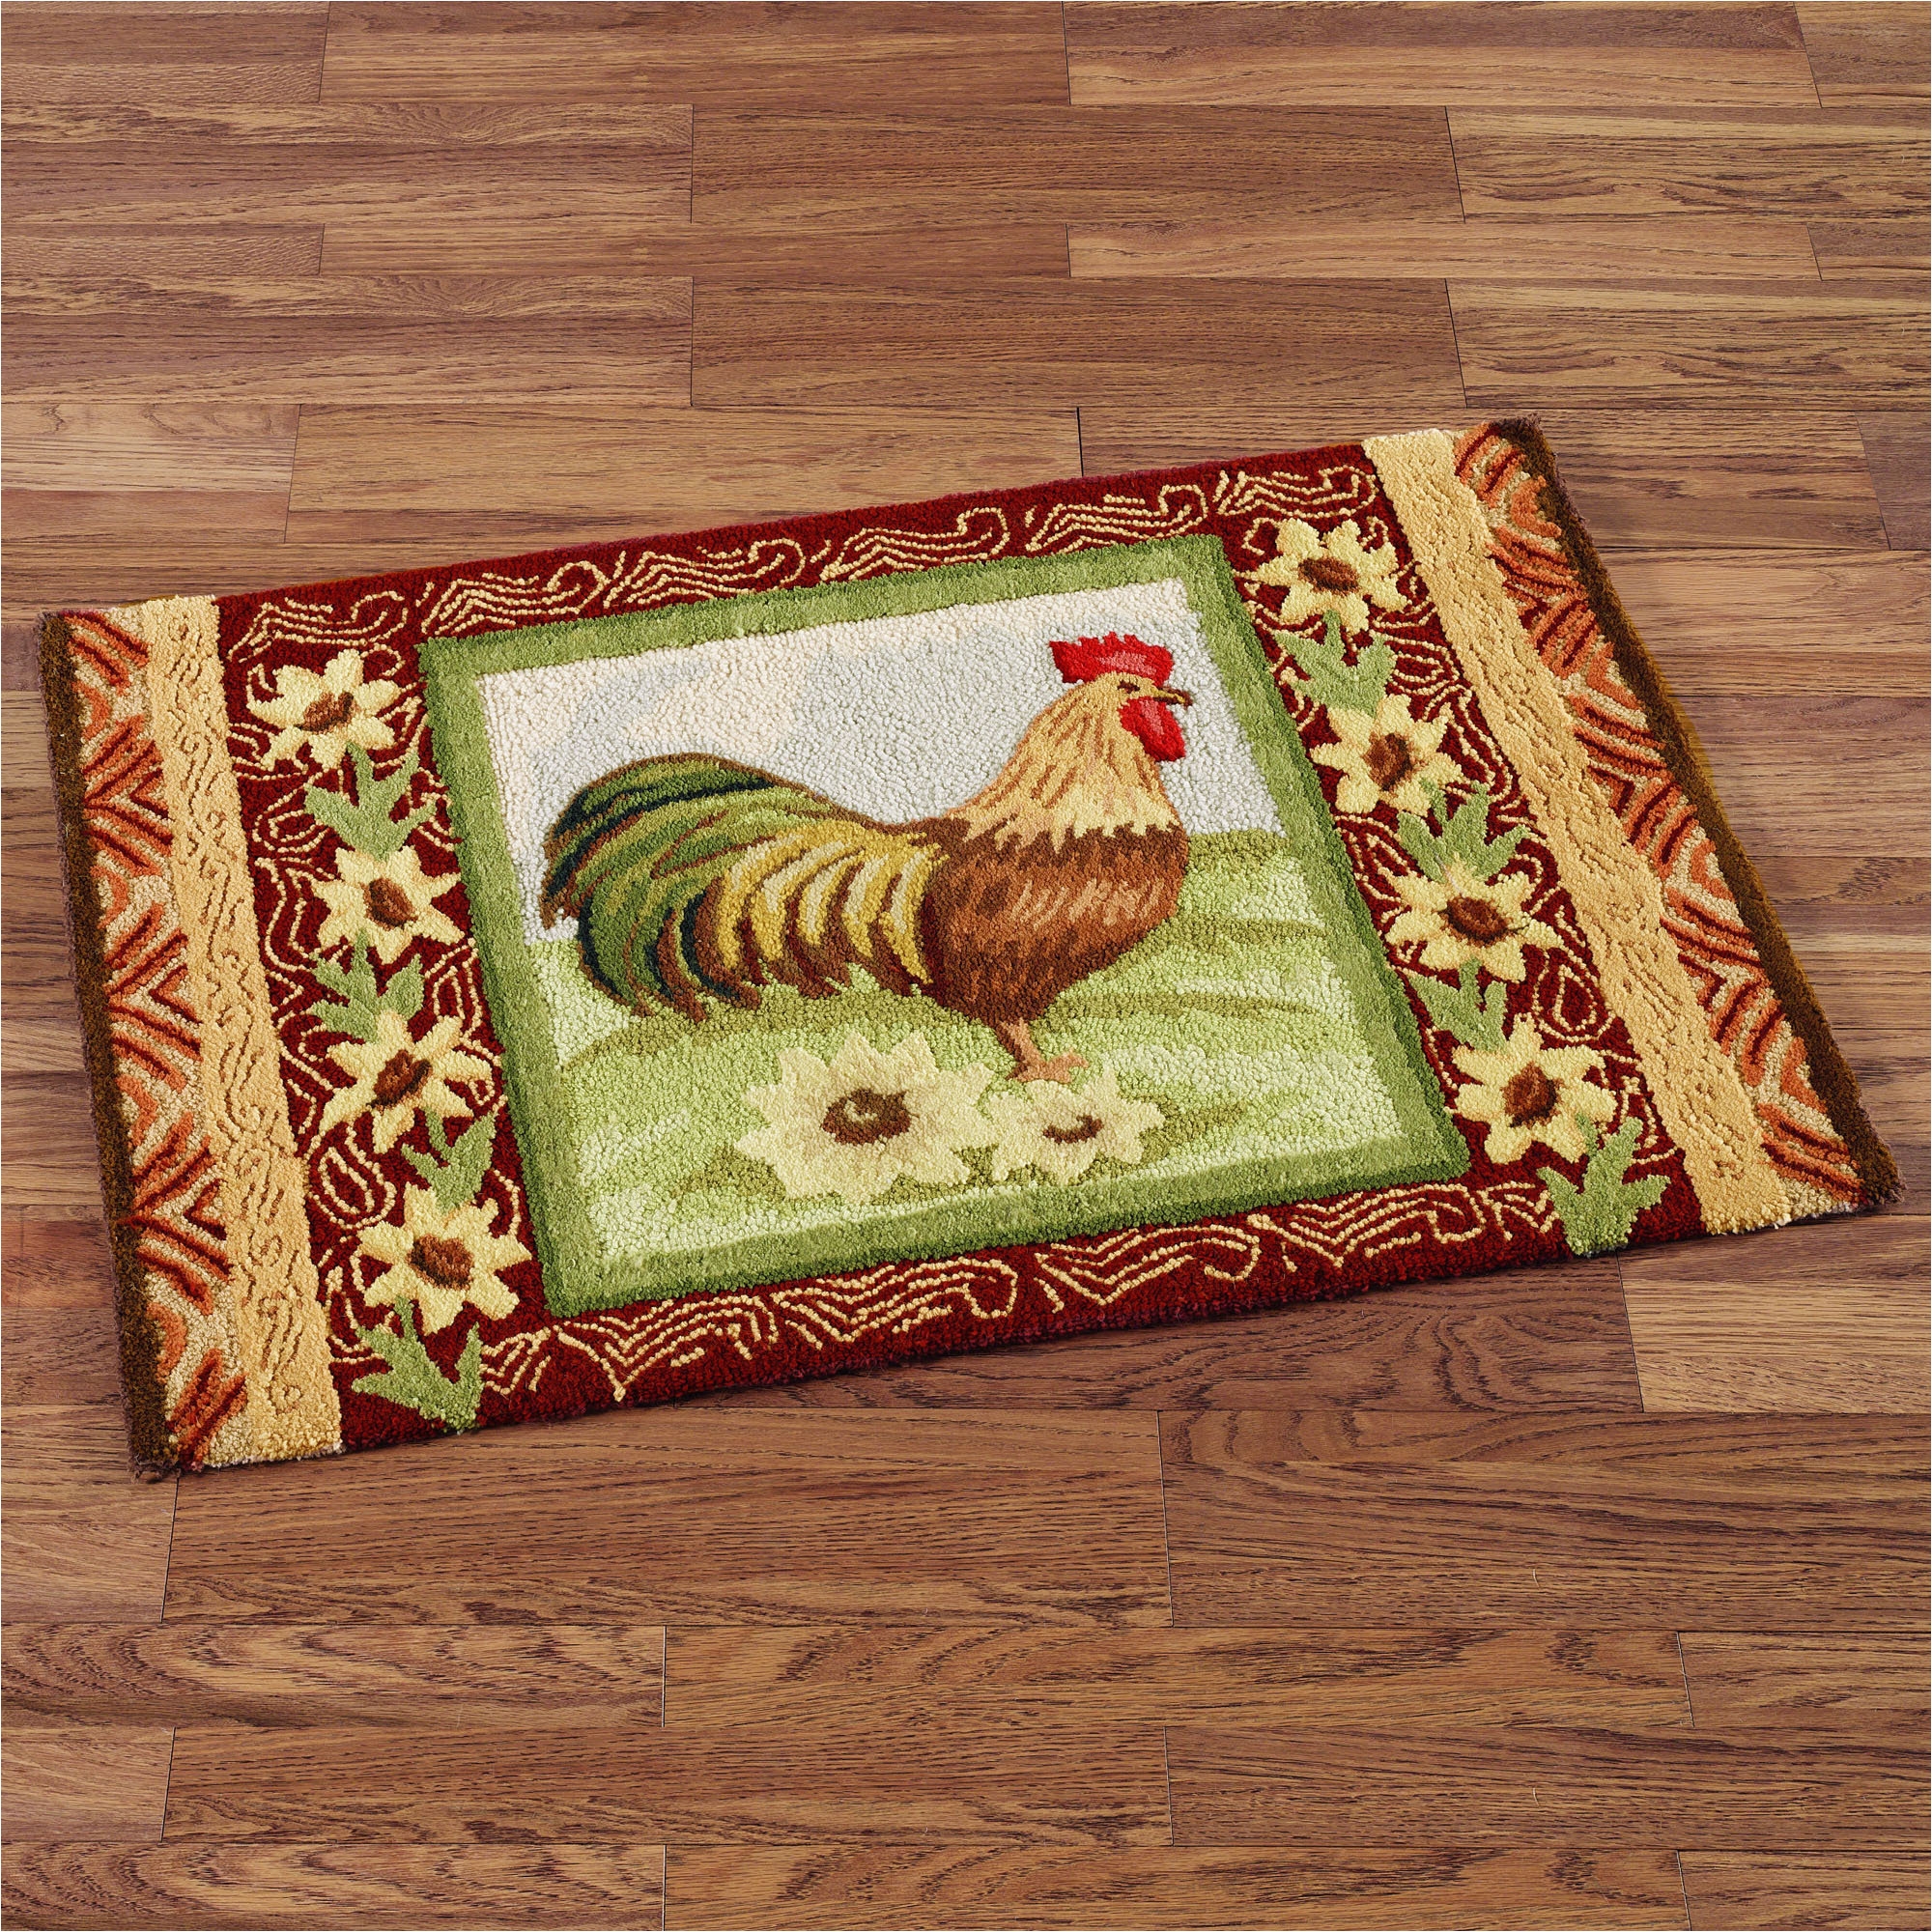 rooster kitchen rug roselawnlutheran simple rooster kitchen rugs with impressive picture of rooster and flowers on wooden floor